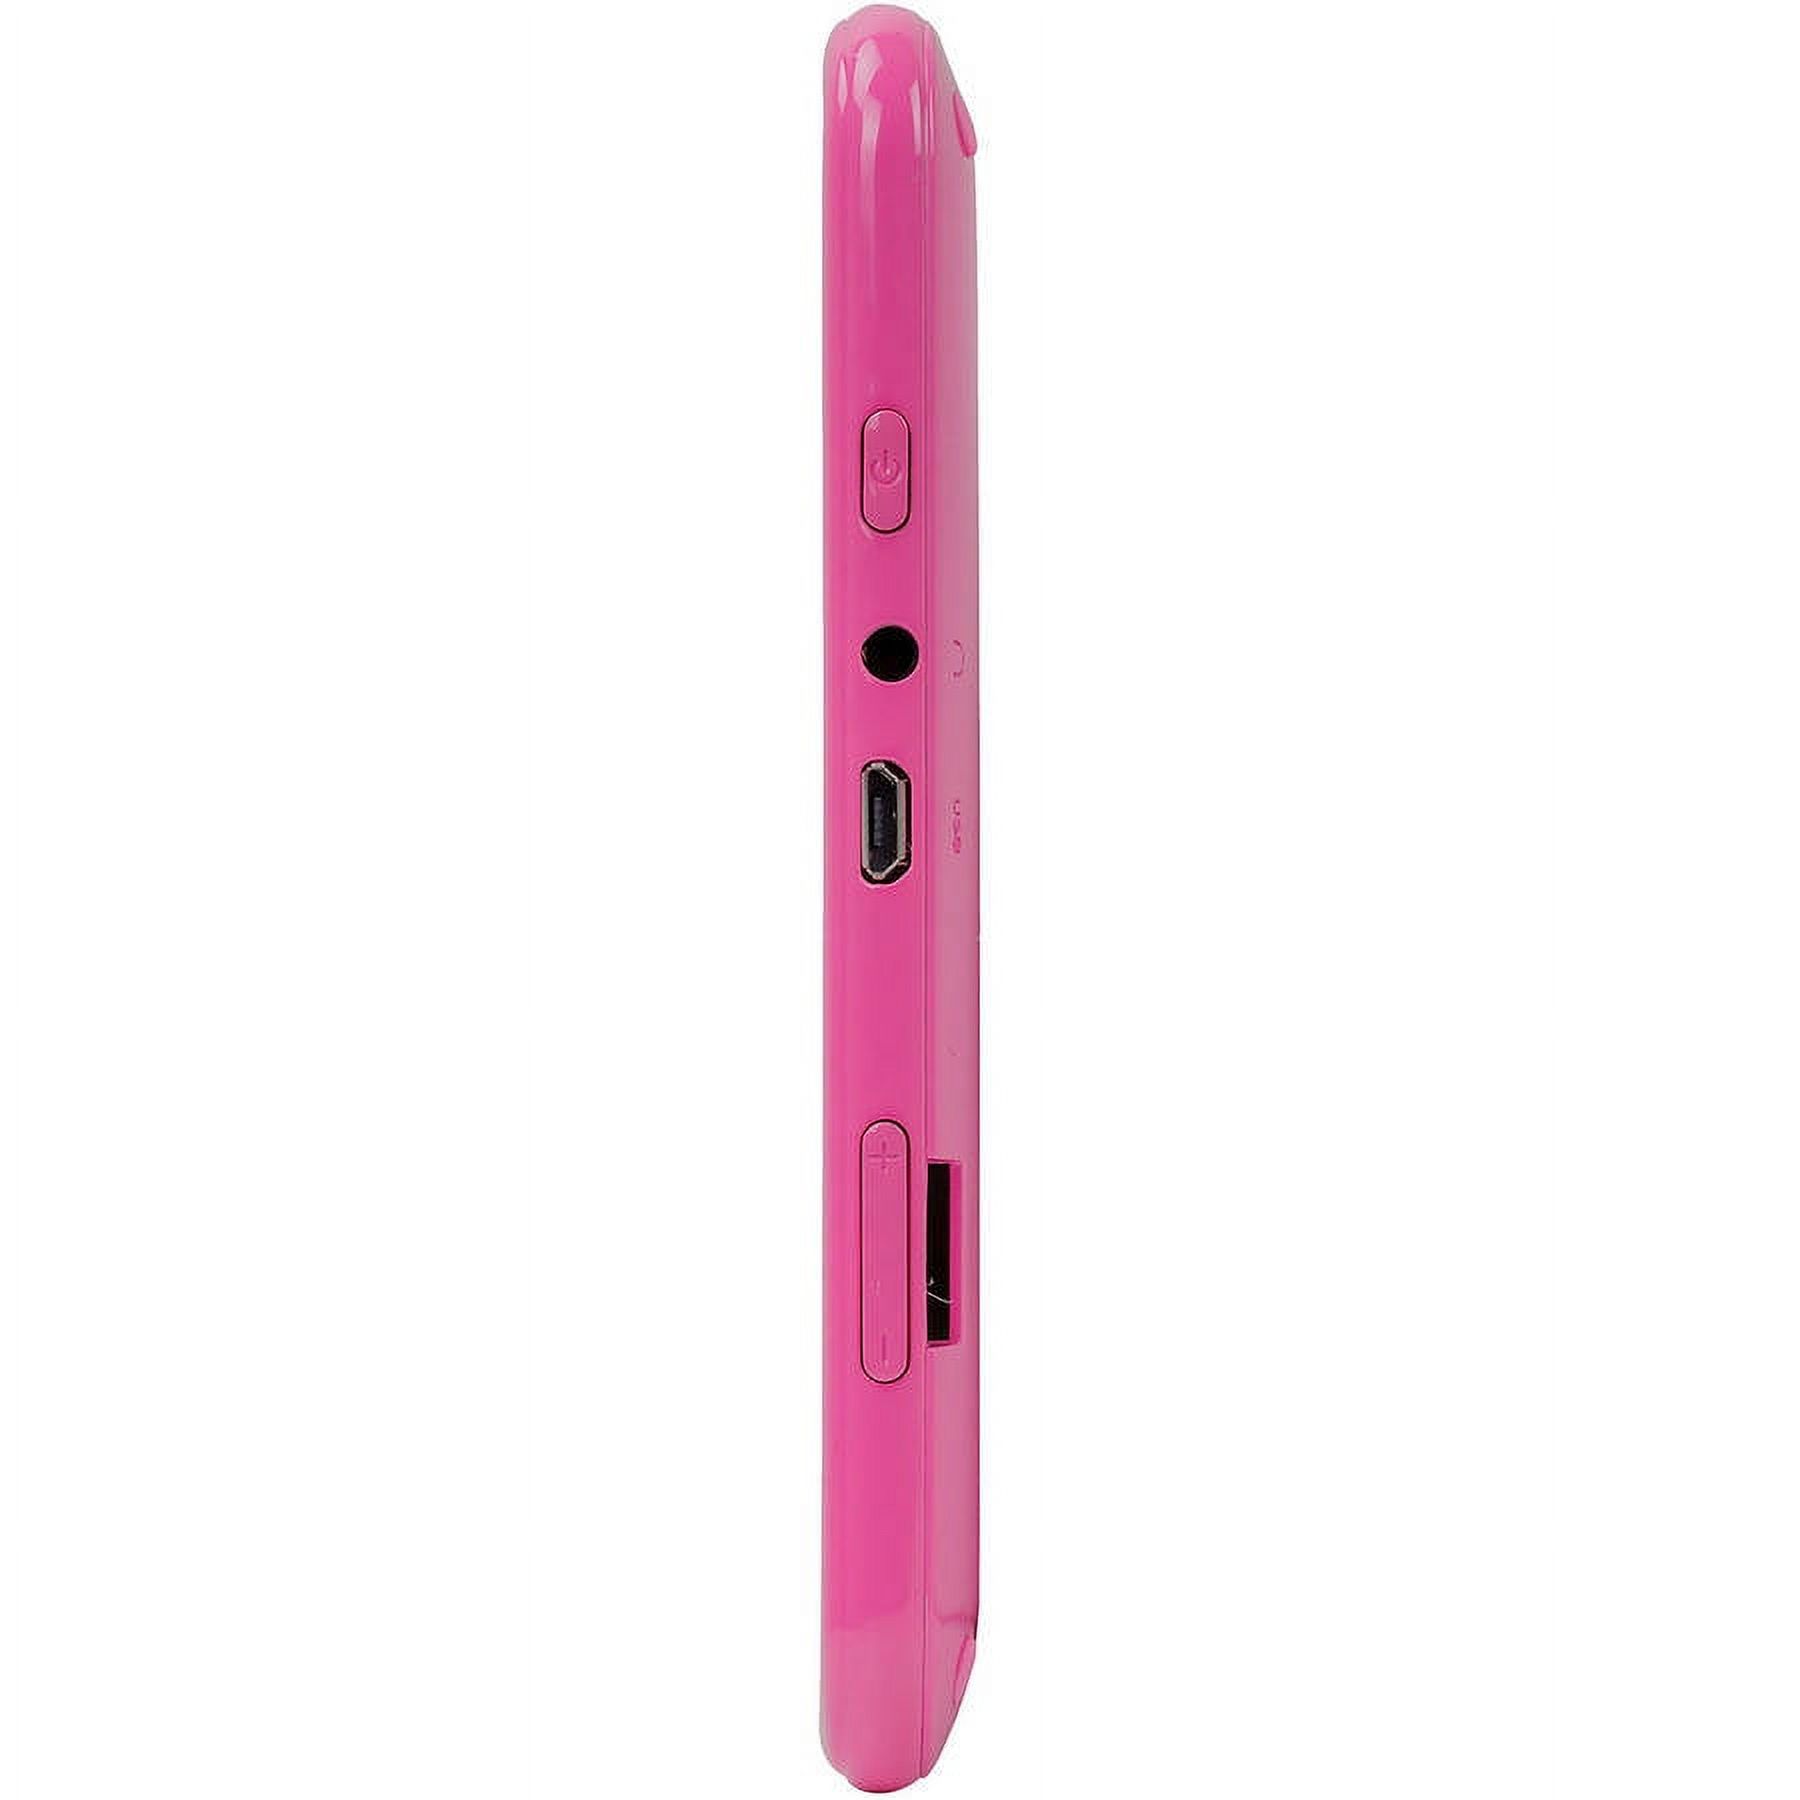 HighQ Learning Tab 7" Kids Tablet 16GB Intel Atom Processor Preloaded with Learning Apps & Games Pink - image 5 of 5